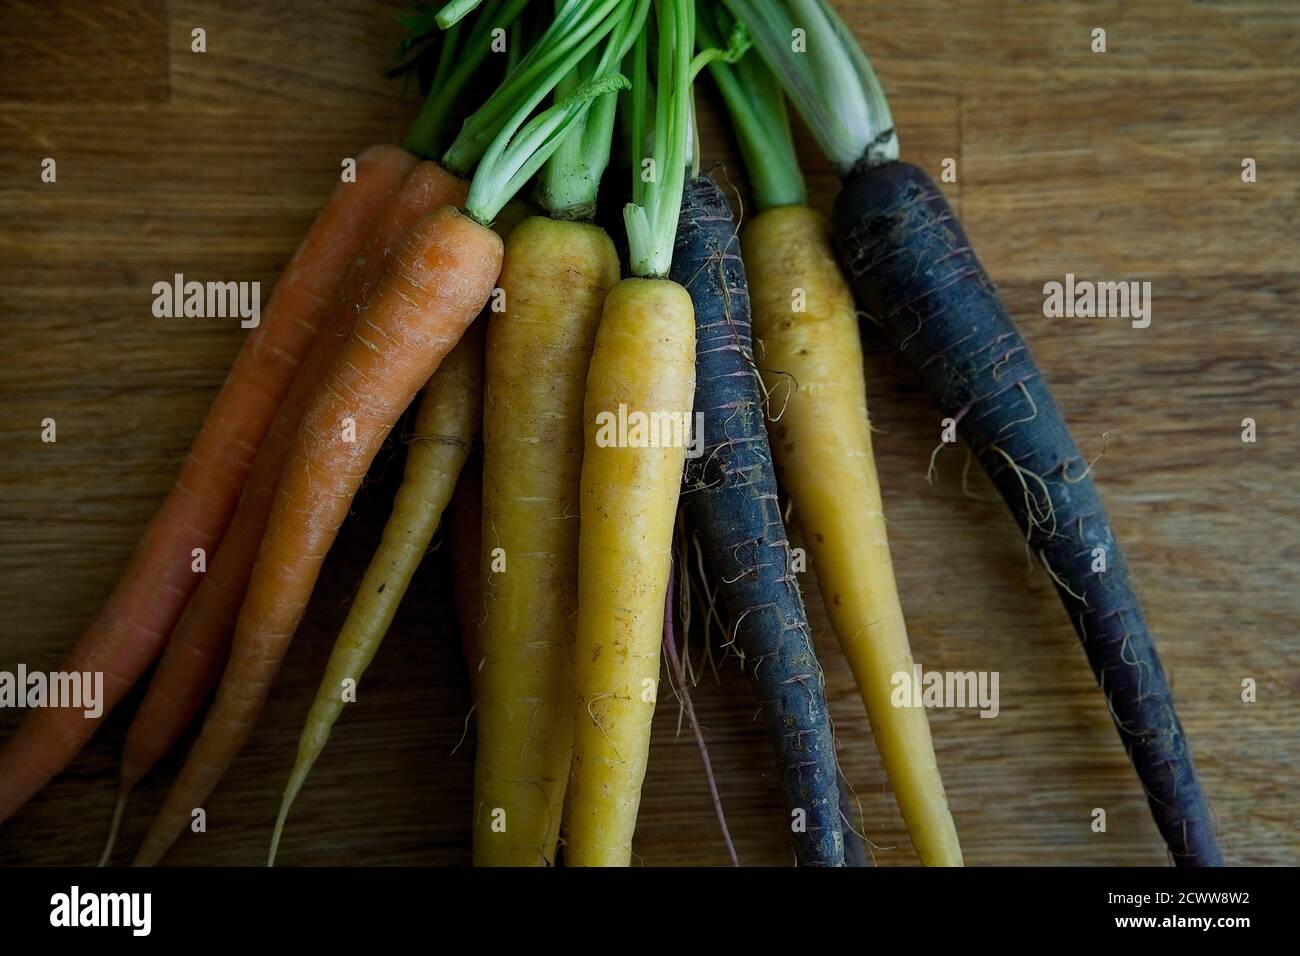 A bunch of whole unprepared multicoloured rainbow carrots on a wooden surface Stock Photo